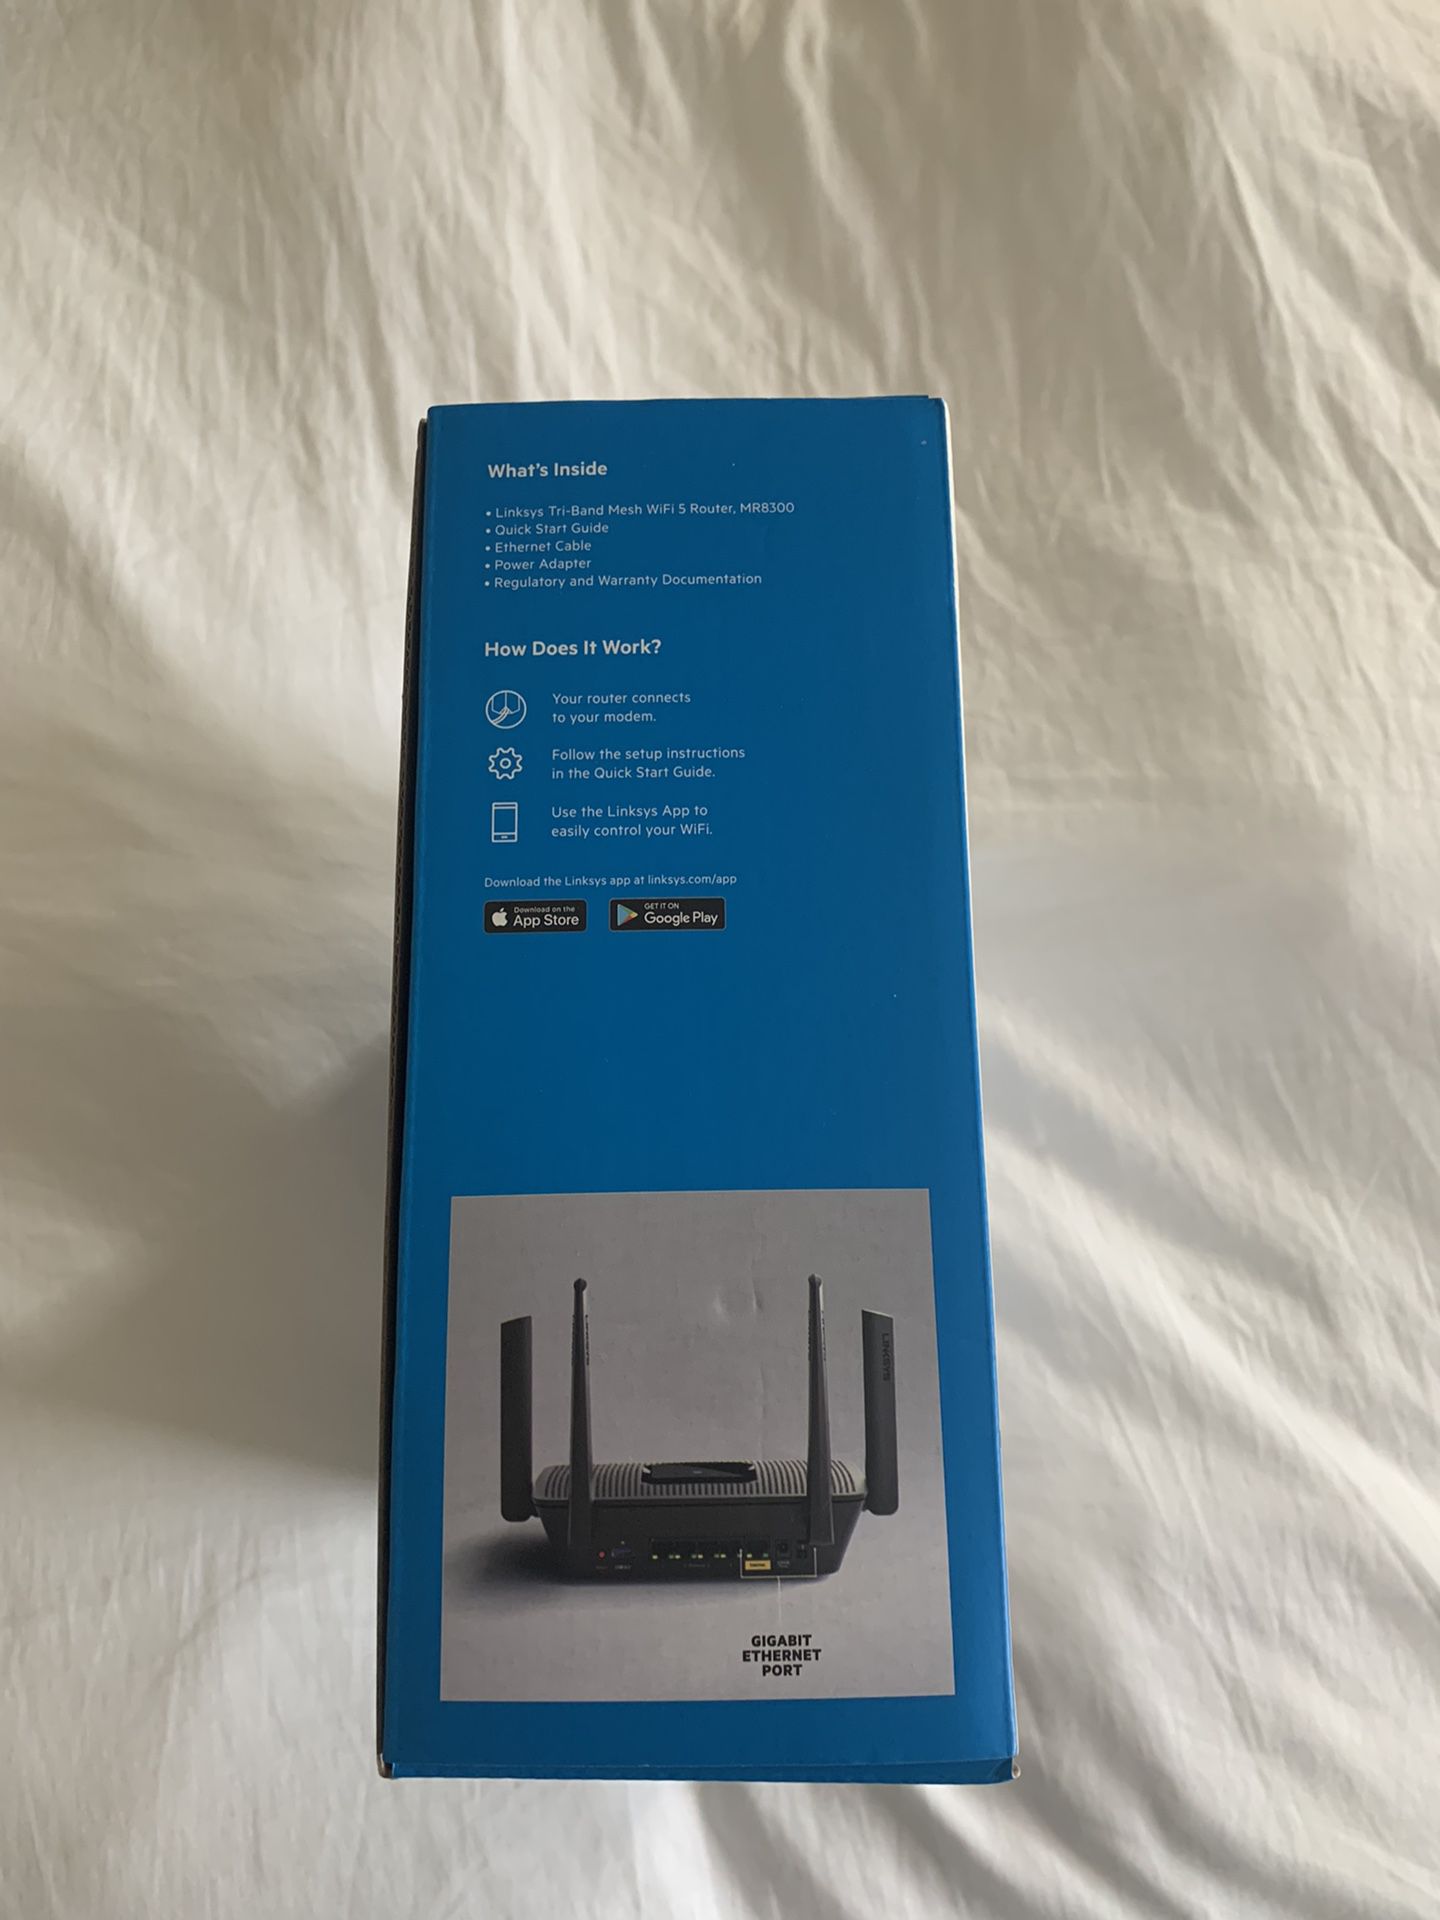 linksys max stream ac2200 - wifi Router